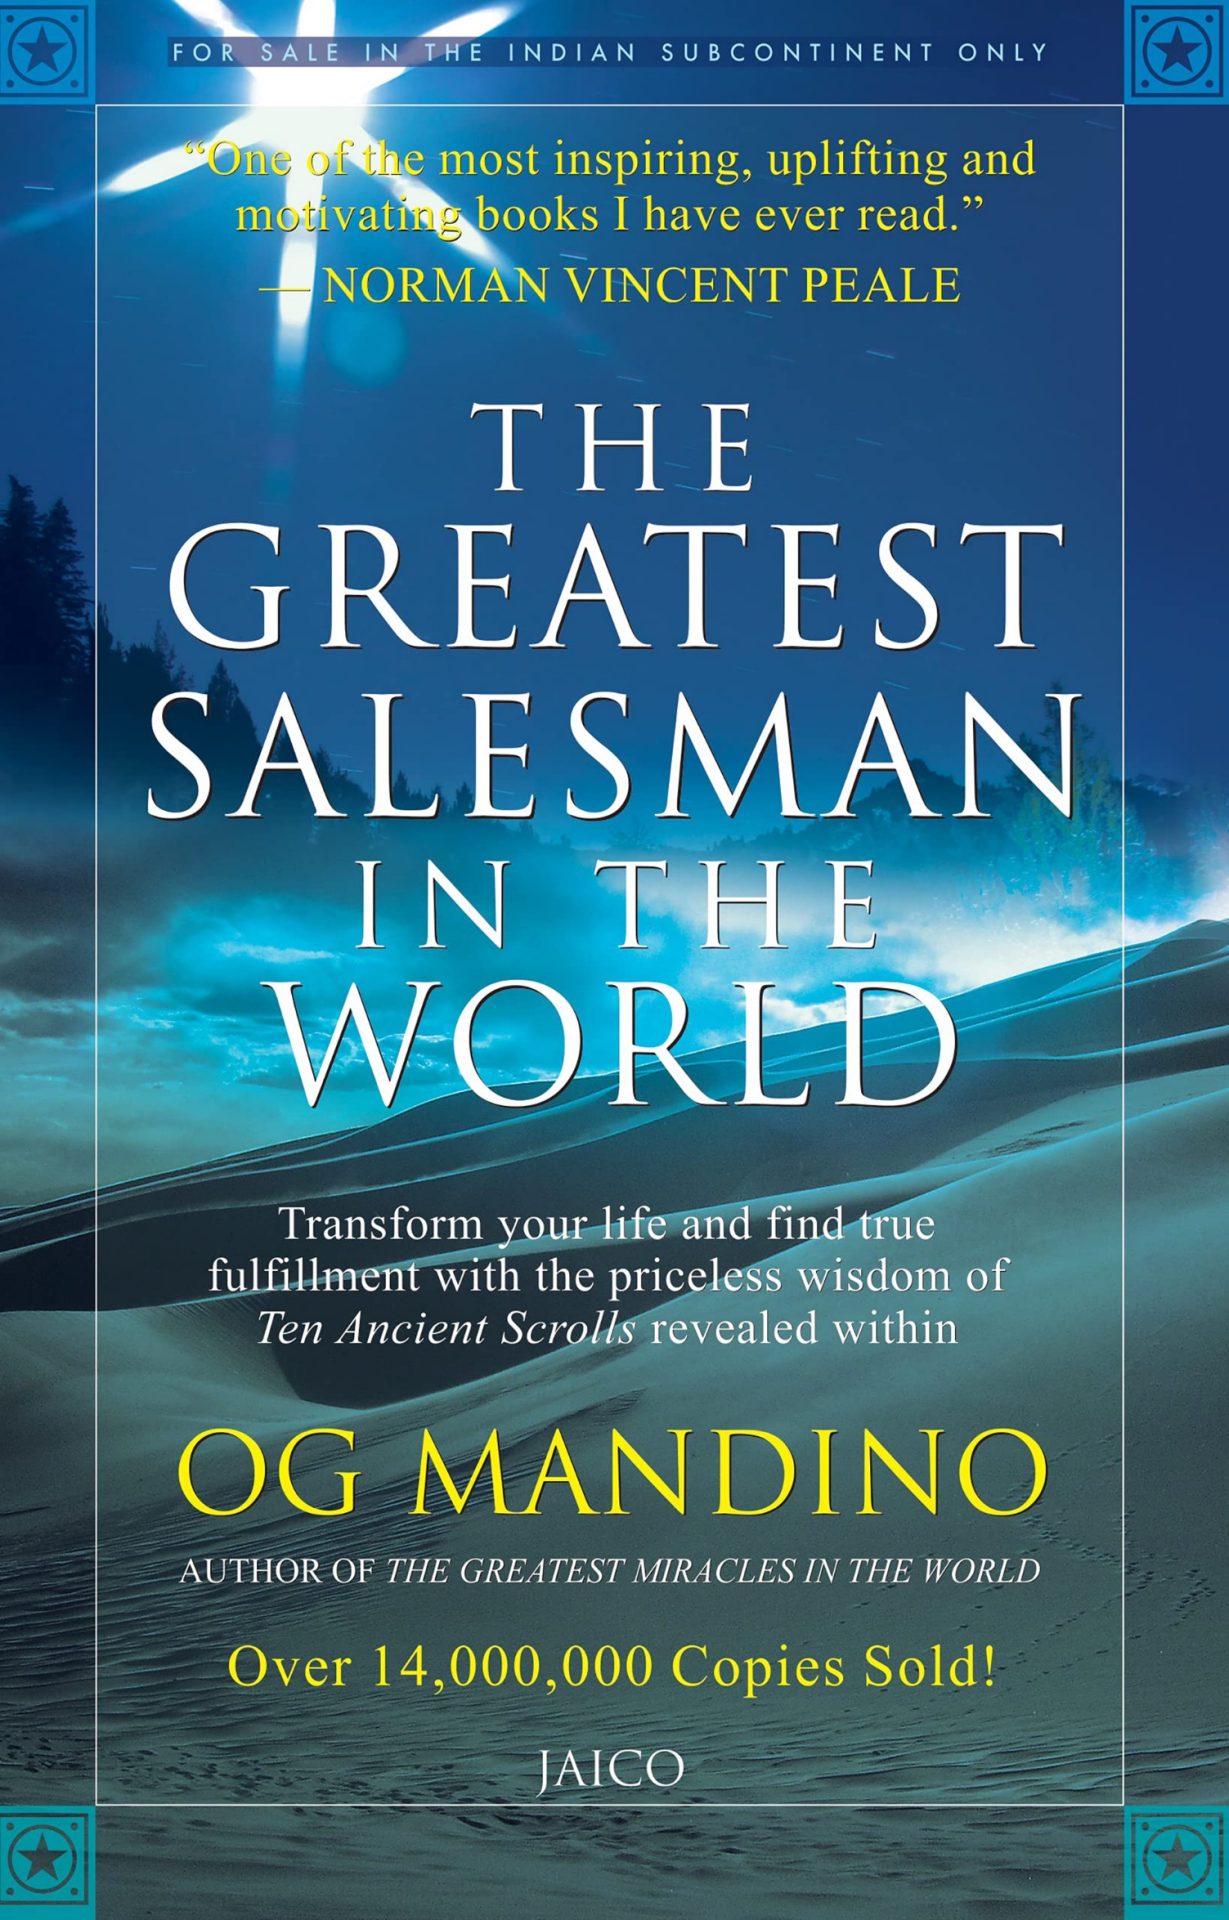 Cover of the book The World's Greatest Salesman - Og Mandino